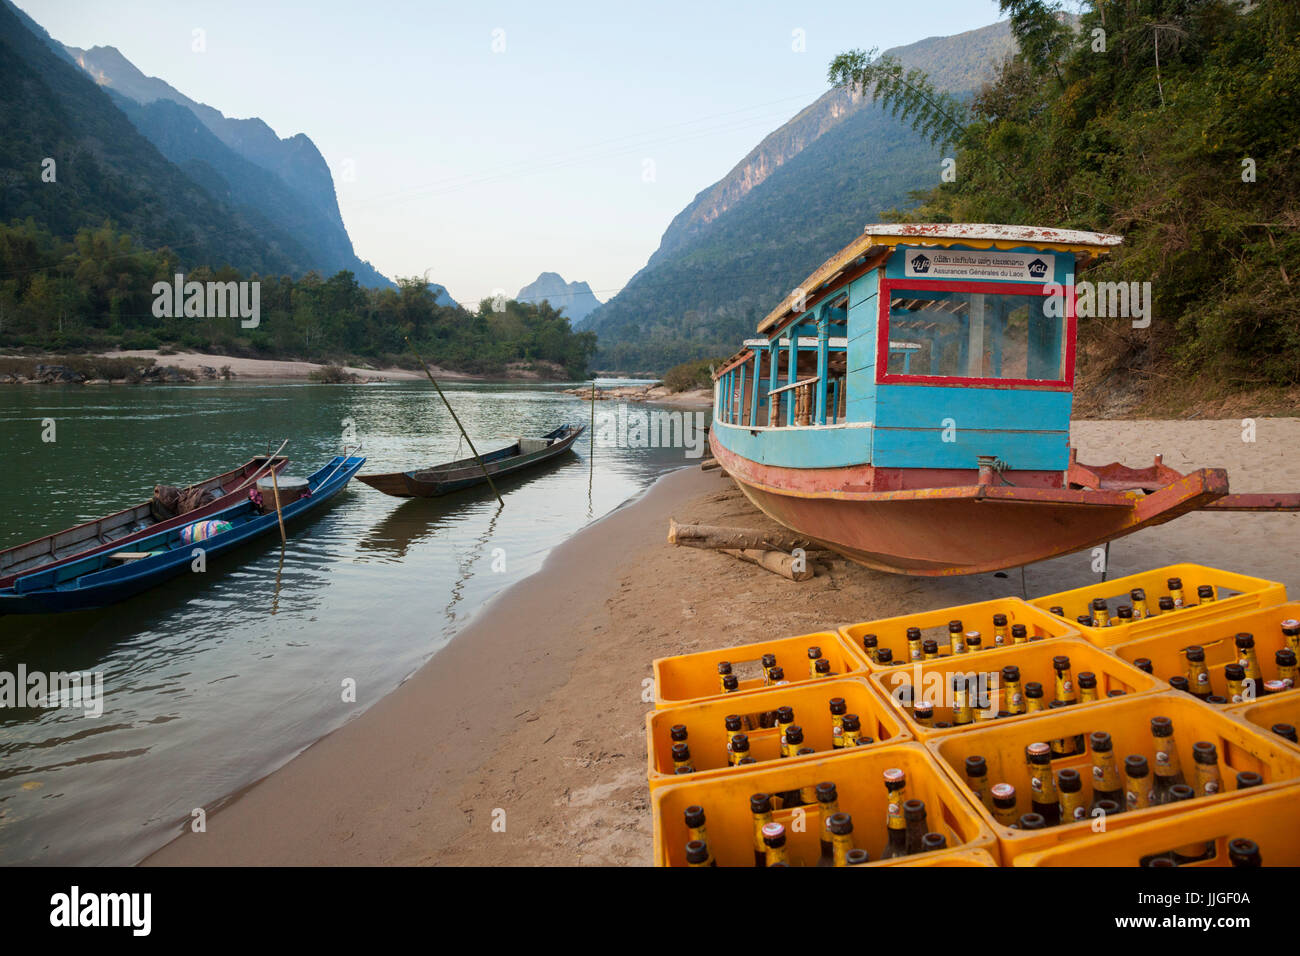 Boats and a large stack of empty Beer Lao (the national beer) on the shore of the Nam Ou River in Muang Ngoi, Laos. The beer is necessary fuel for the vibrant tourist trade centered around the town. Stock Photo